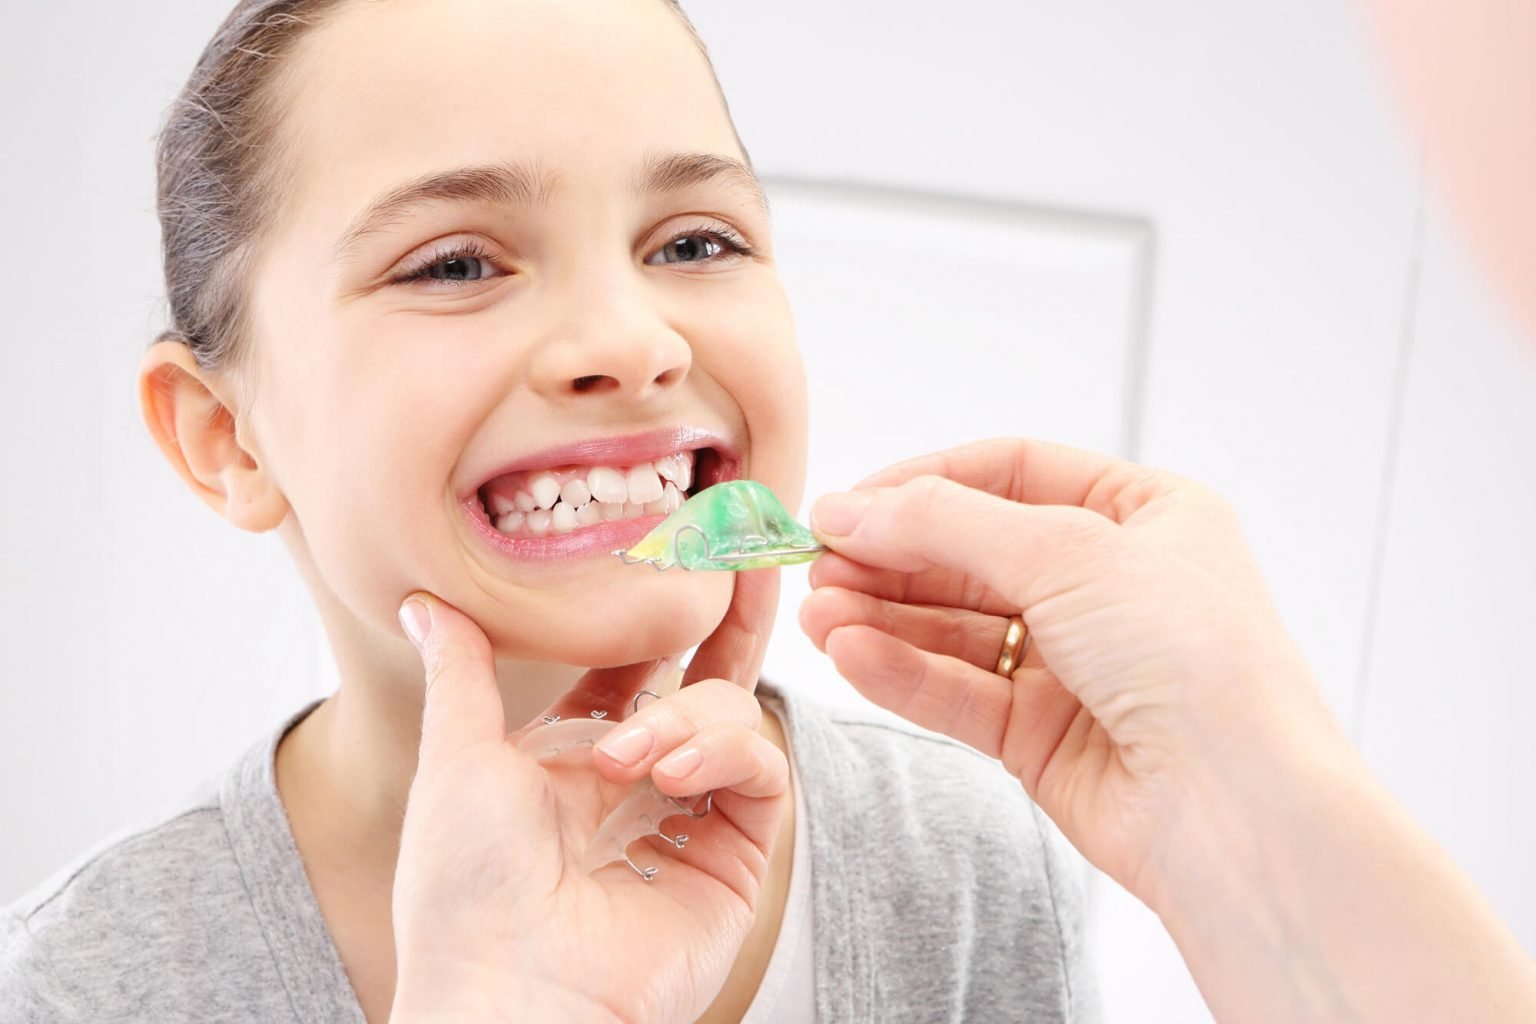 What Do You Want To Know About Orthodontic?